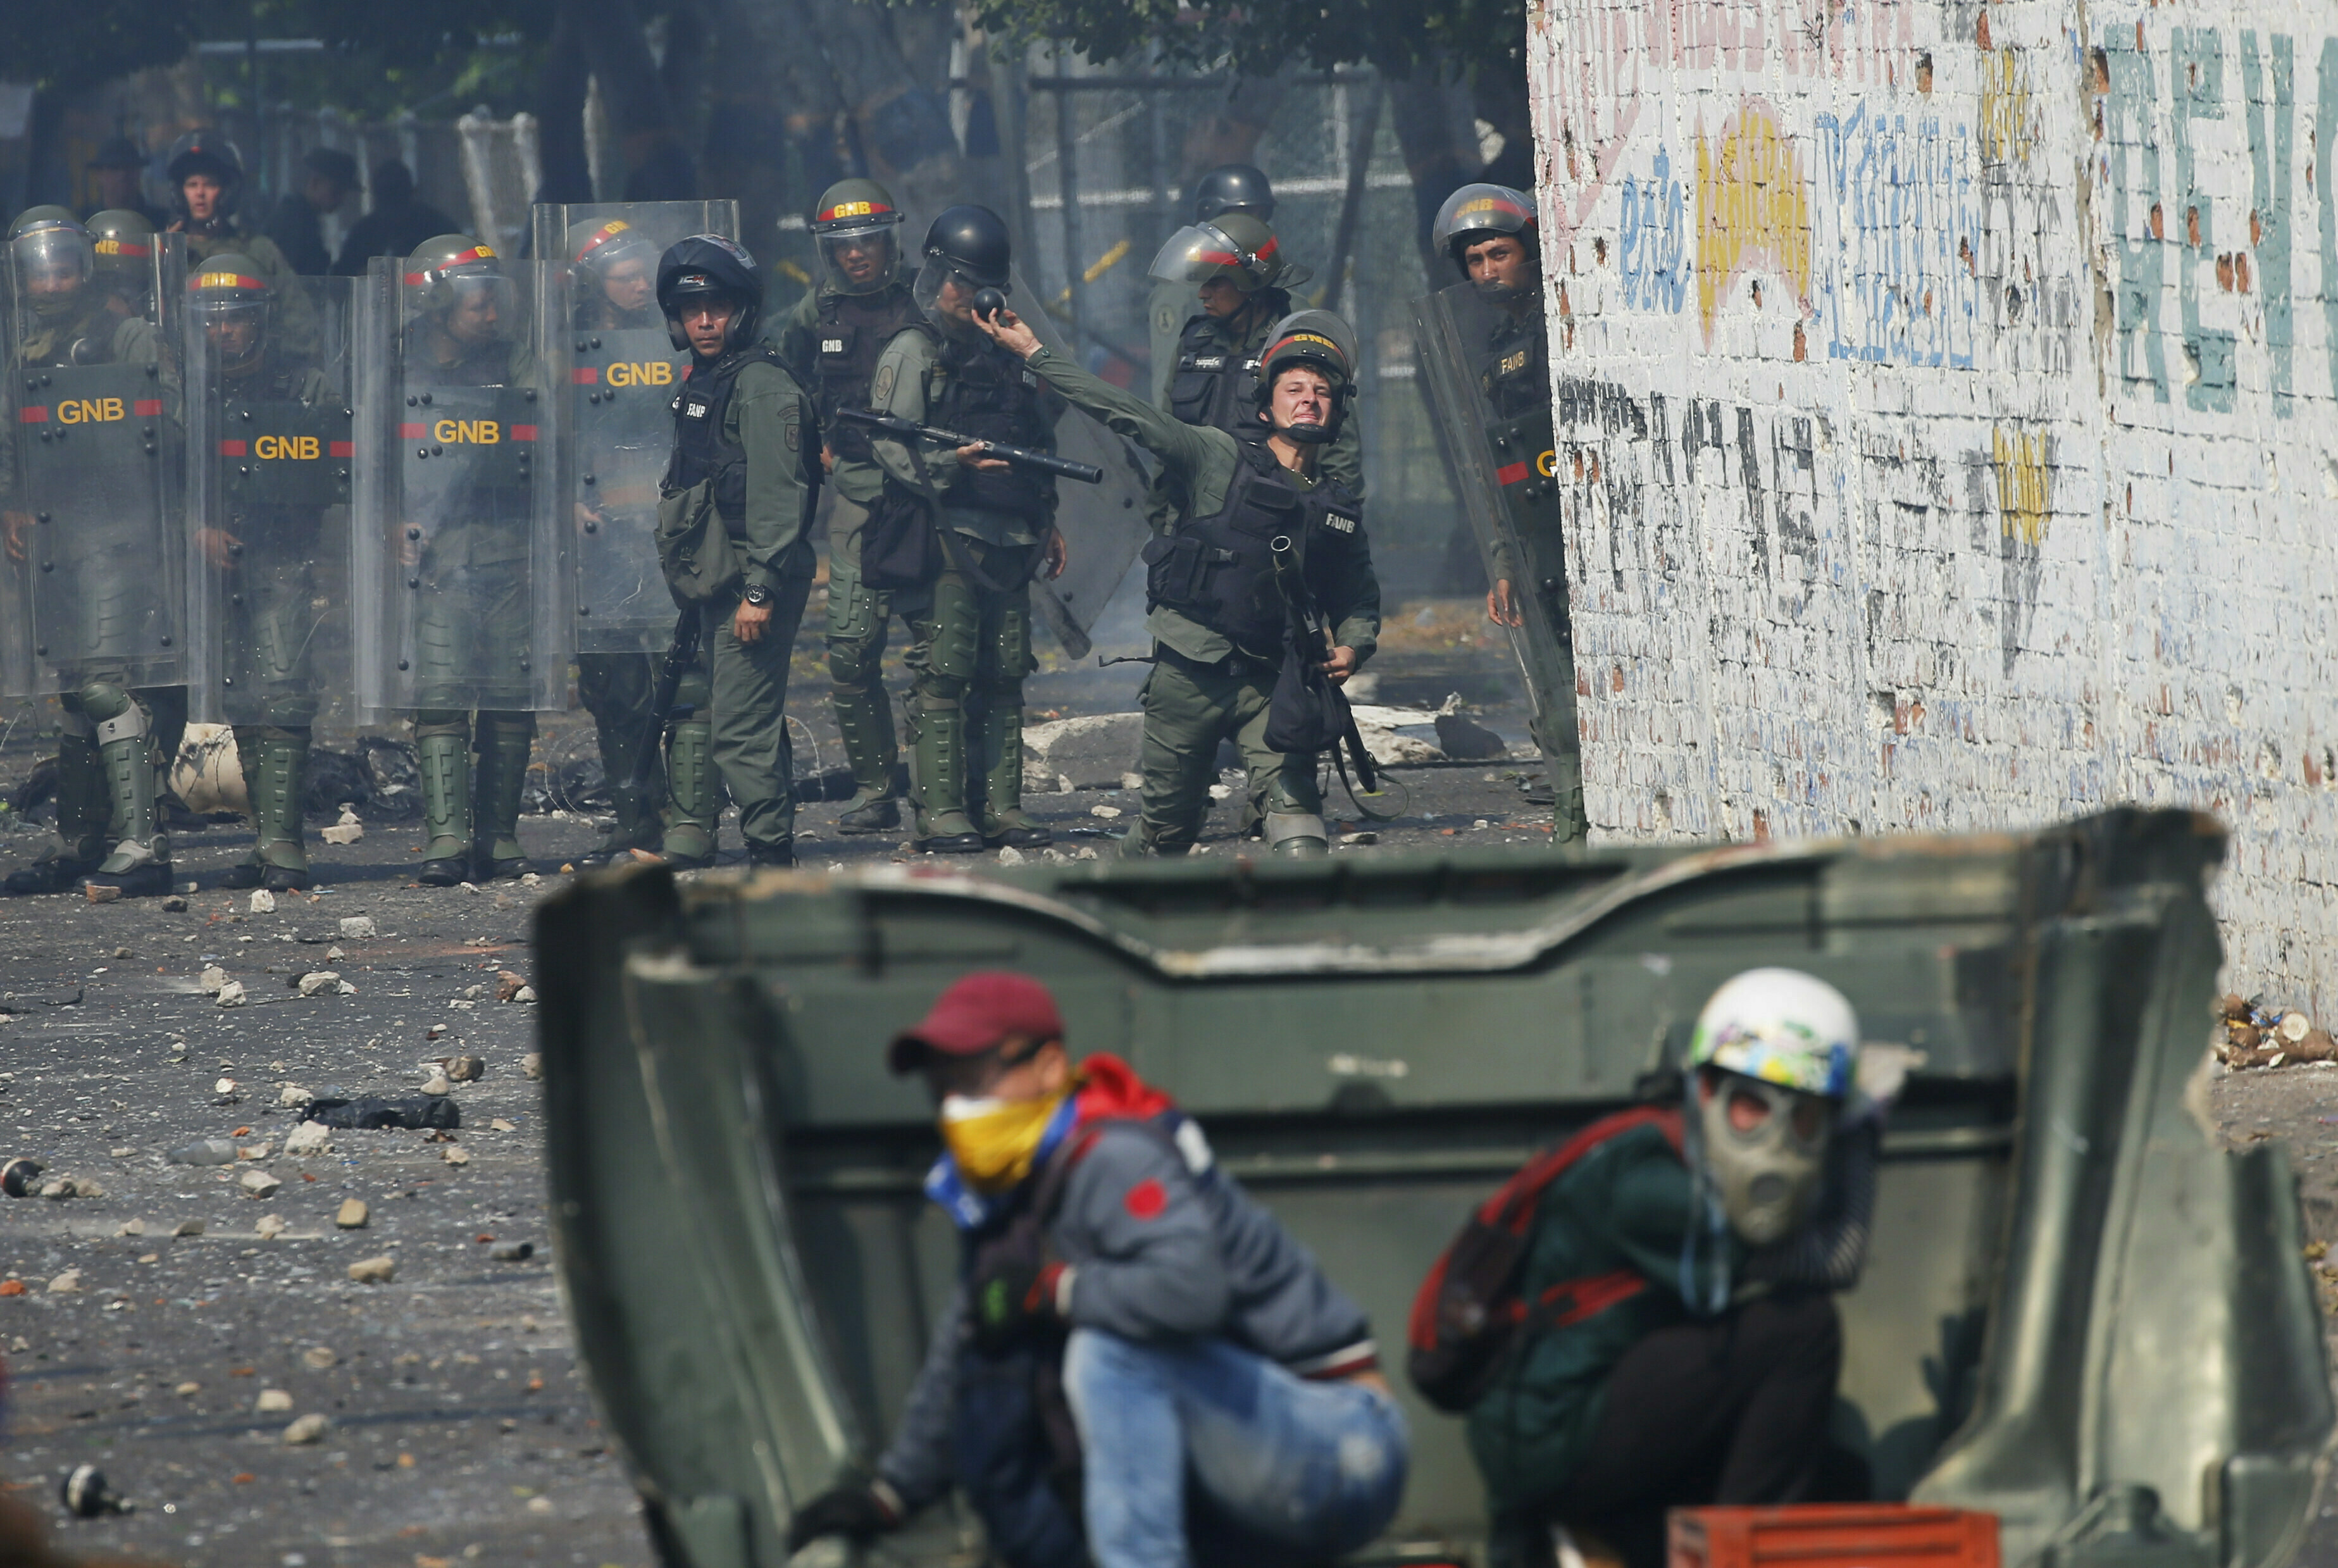 A Venezuelan Bolivarian National Guard officer throws a teargas grenade towards demonstrator during clashes in Urena, Venezuela, near the bordr with Colombia, Saturday, Feb. 23, 2019. Venezuela's National Guard fired tear gas on residents clearing a barricaded border bridge between Venezuela and Colombia on Saturday, heightening tensions over blocked humanitarian aid that opposition leader Juan Guaido has vowed to bring into the country over objections from President Nicolas Maduro.(AP Photo/Fernando Llano)